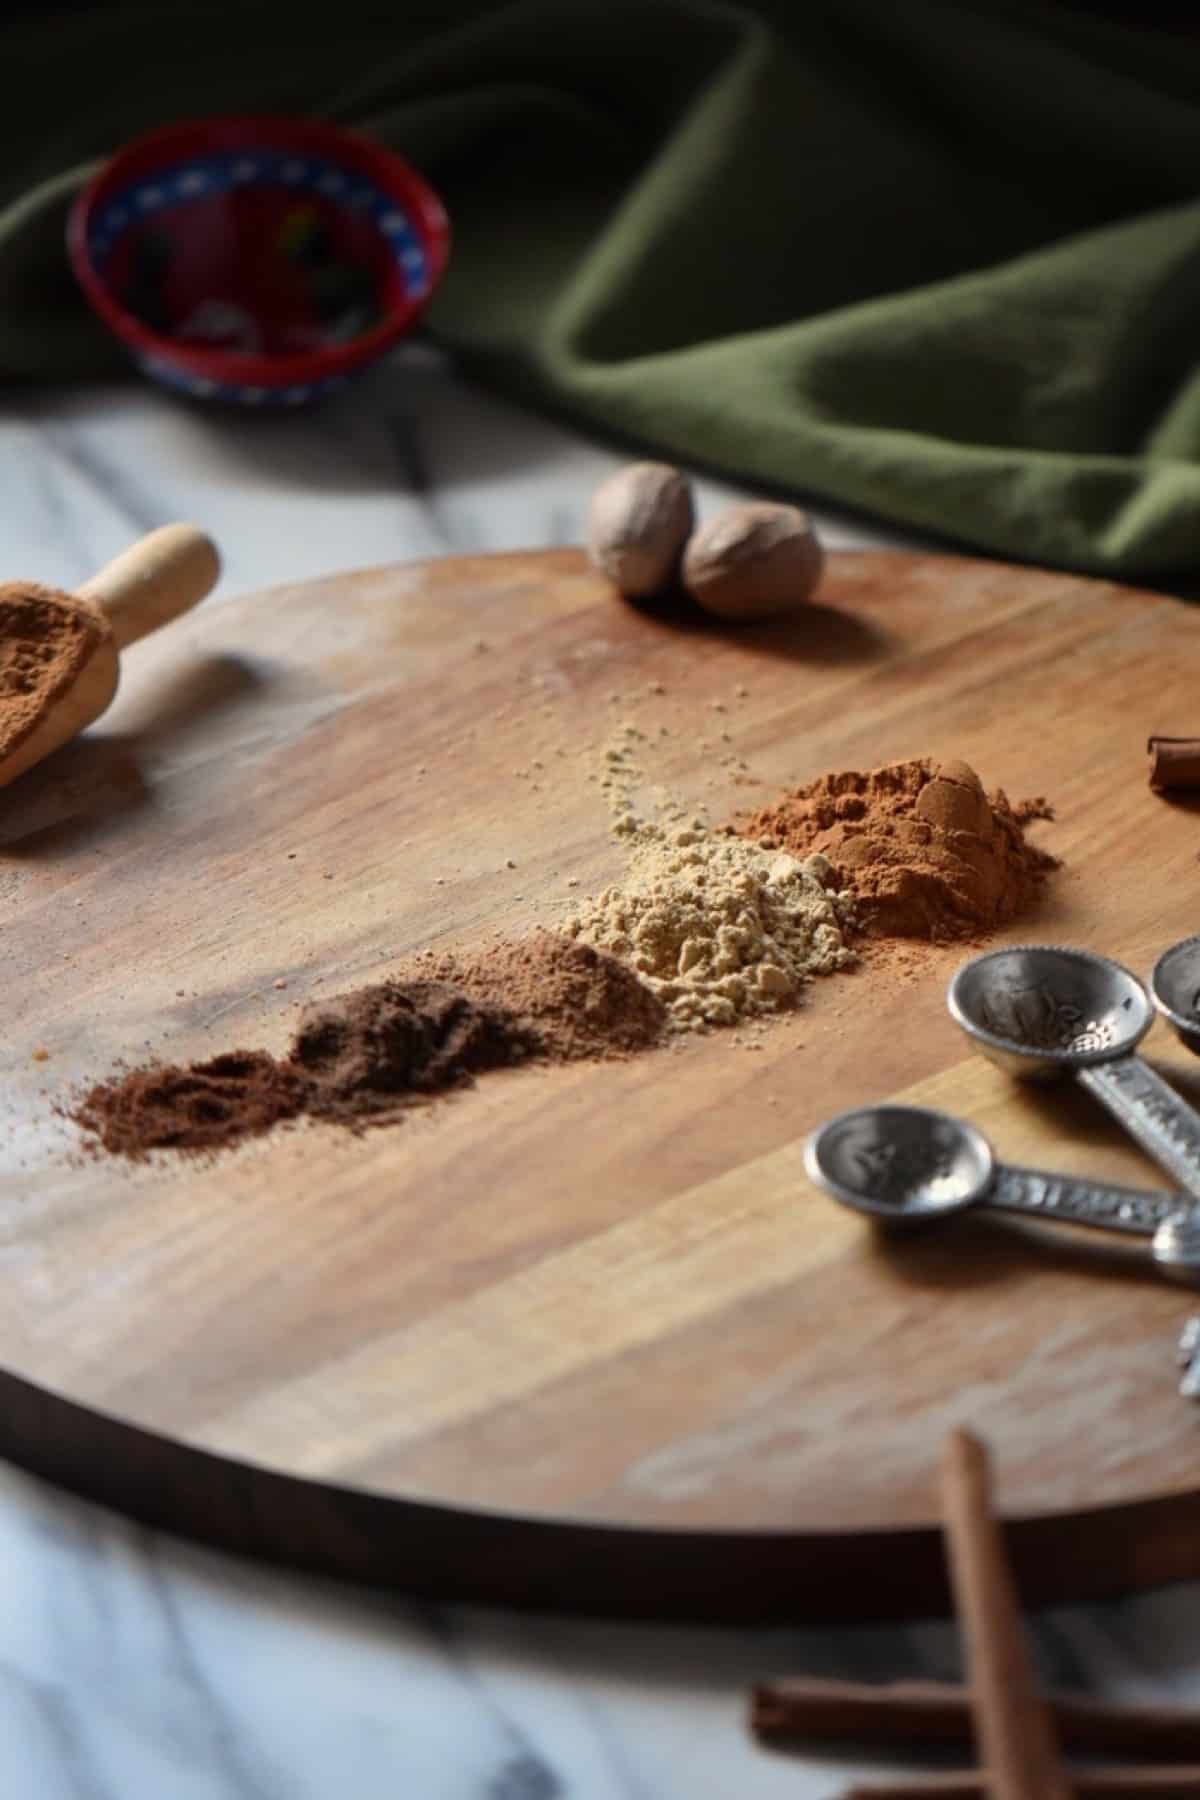 The ingredients used to make pumpkin spice include cinnamon, ginger, nutmeg, allspice, and cloves.